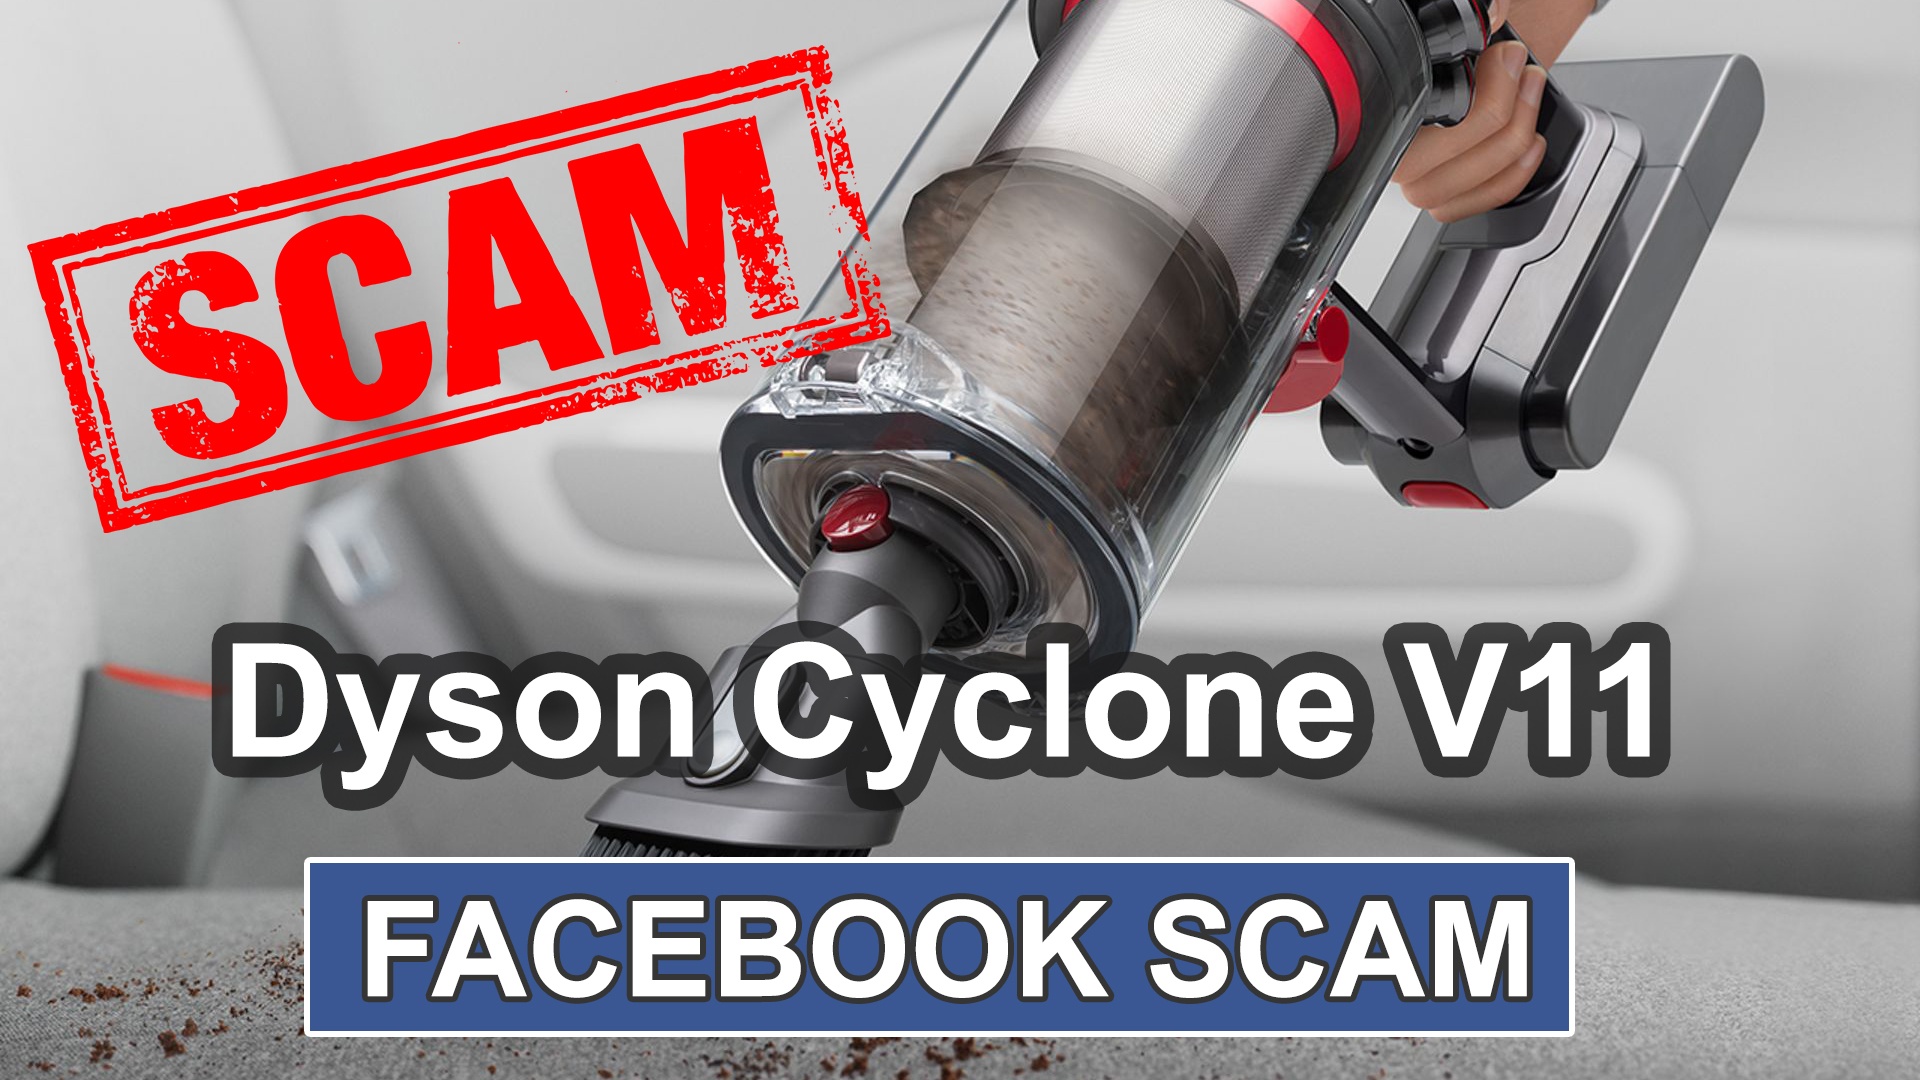 Dyson Cyclone V11 $3 Vacuum Cleaner Giveaway on Facebook ⚠️